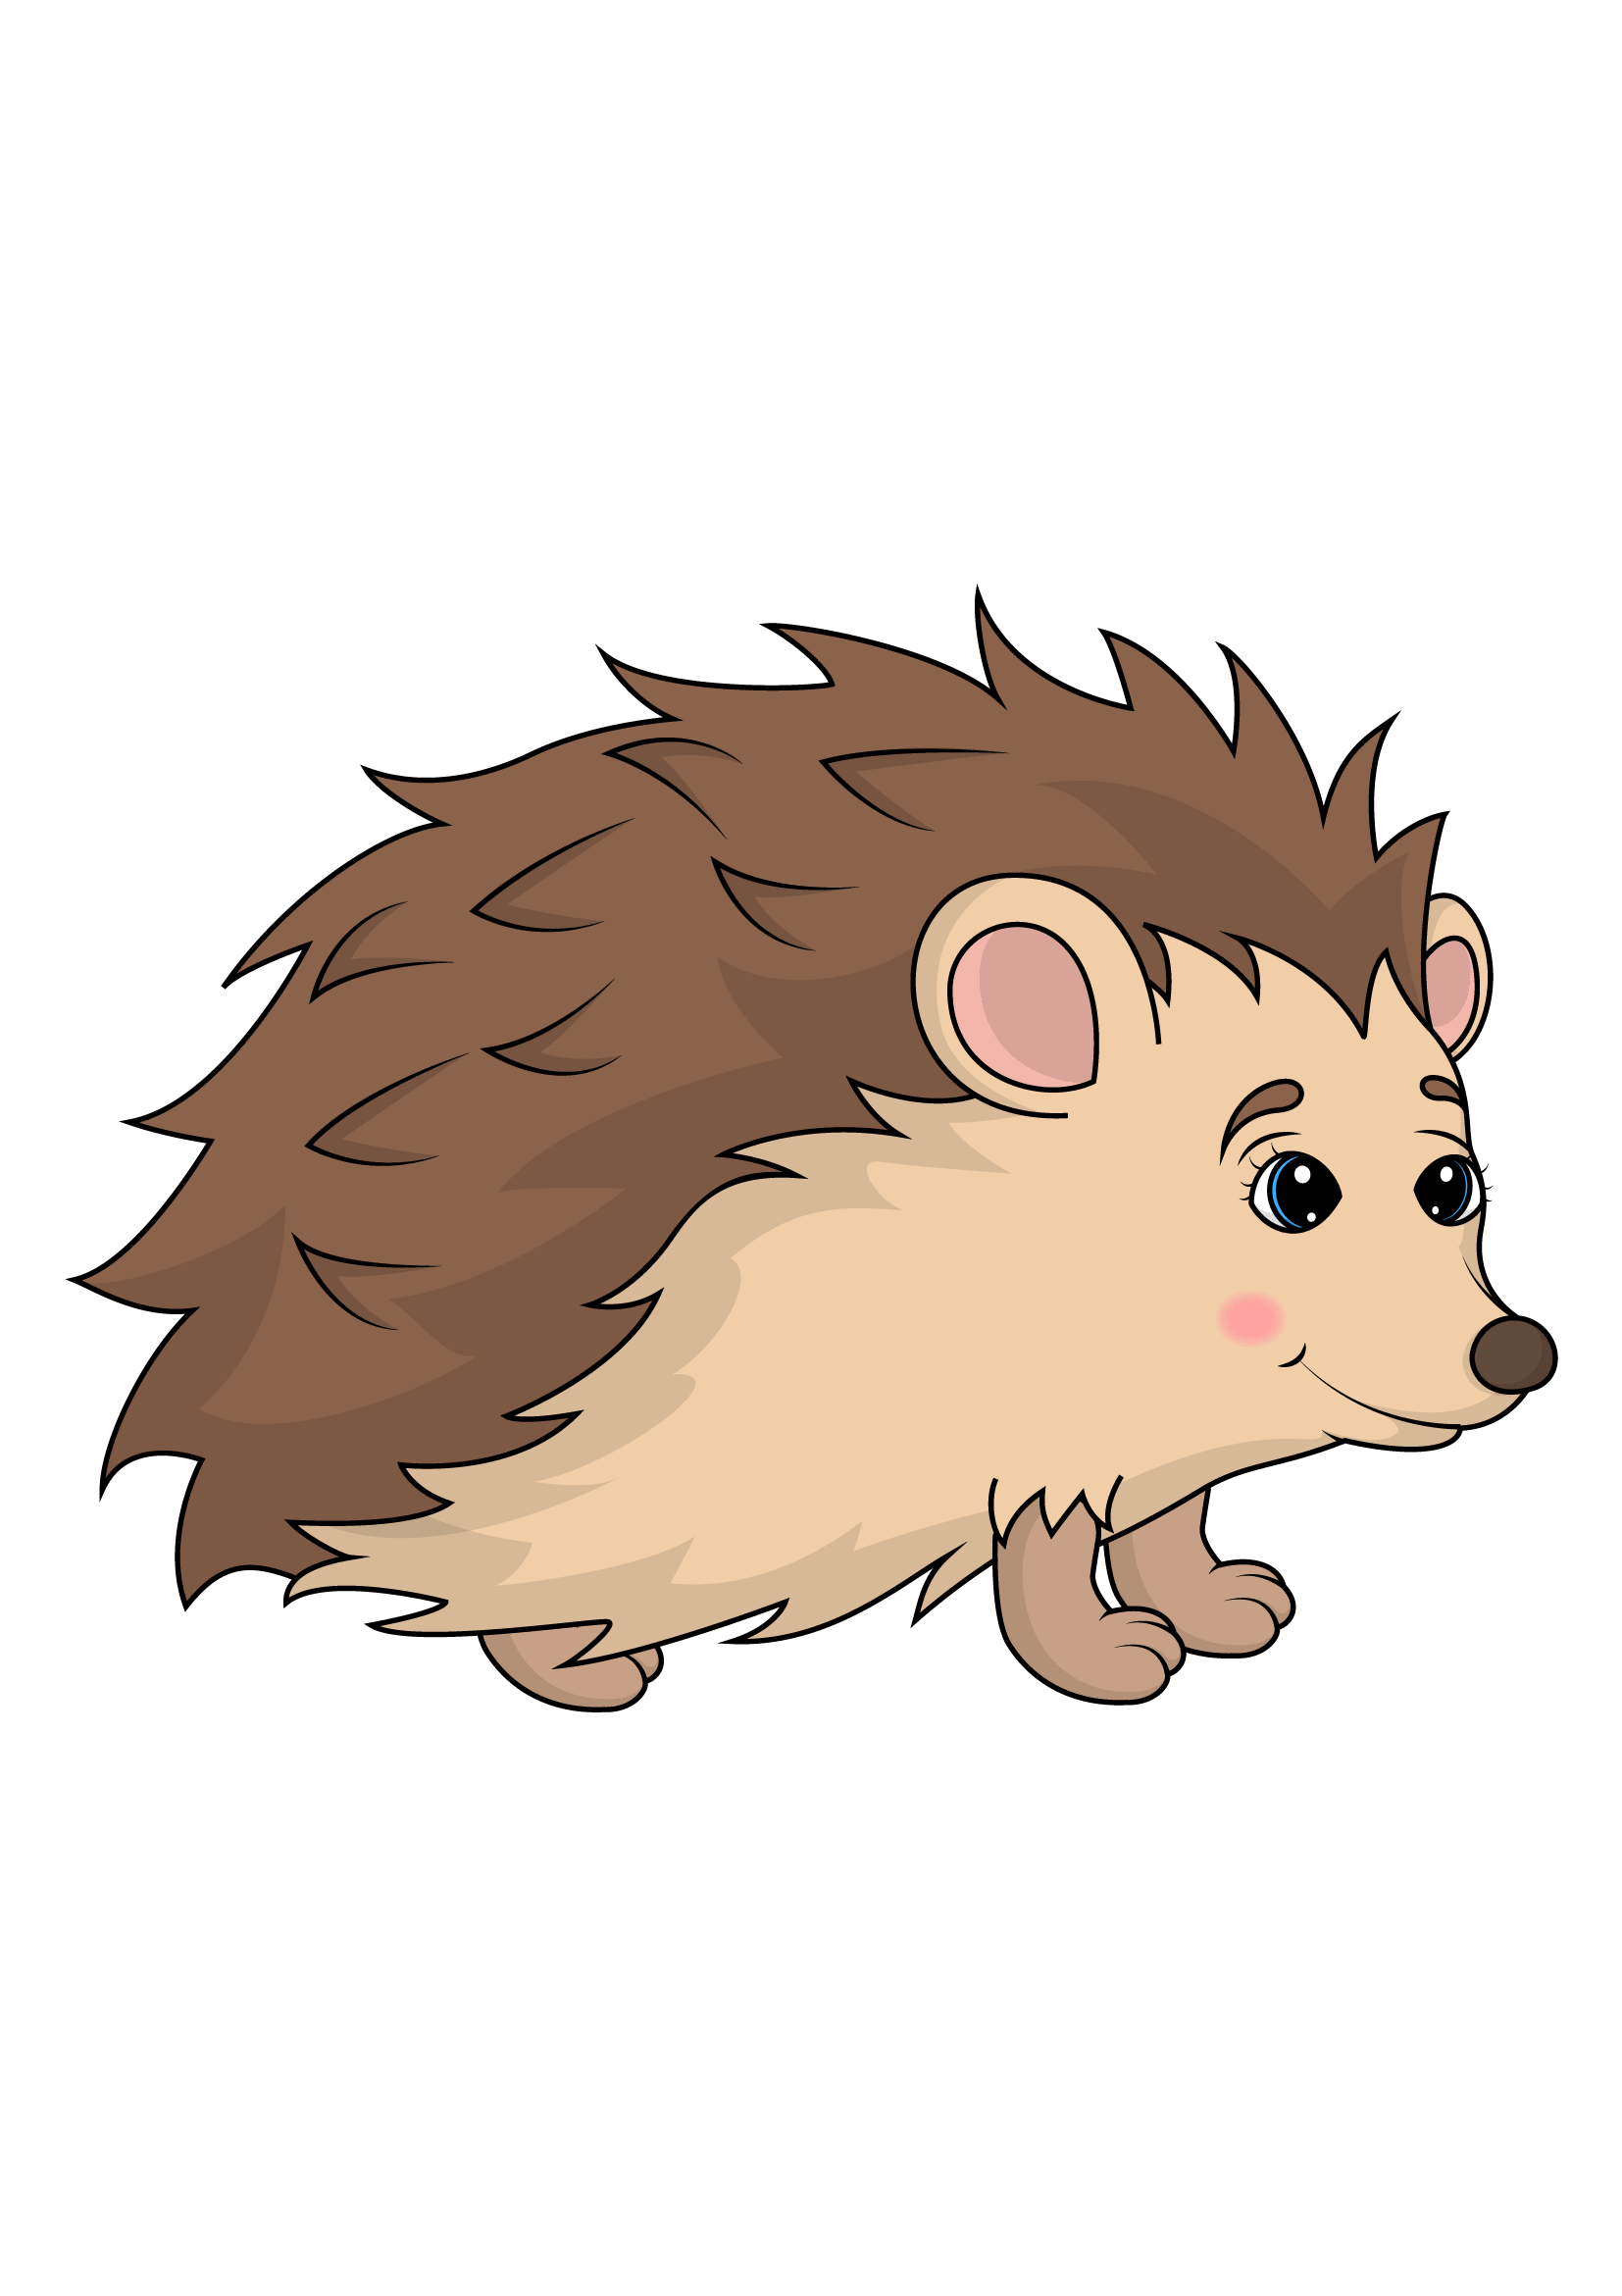 How to Draw A Hedgehog Step by Step Printable